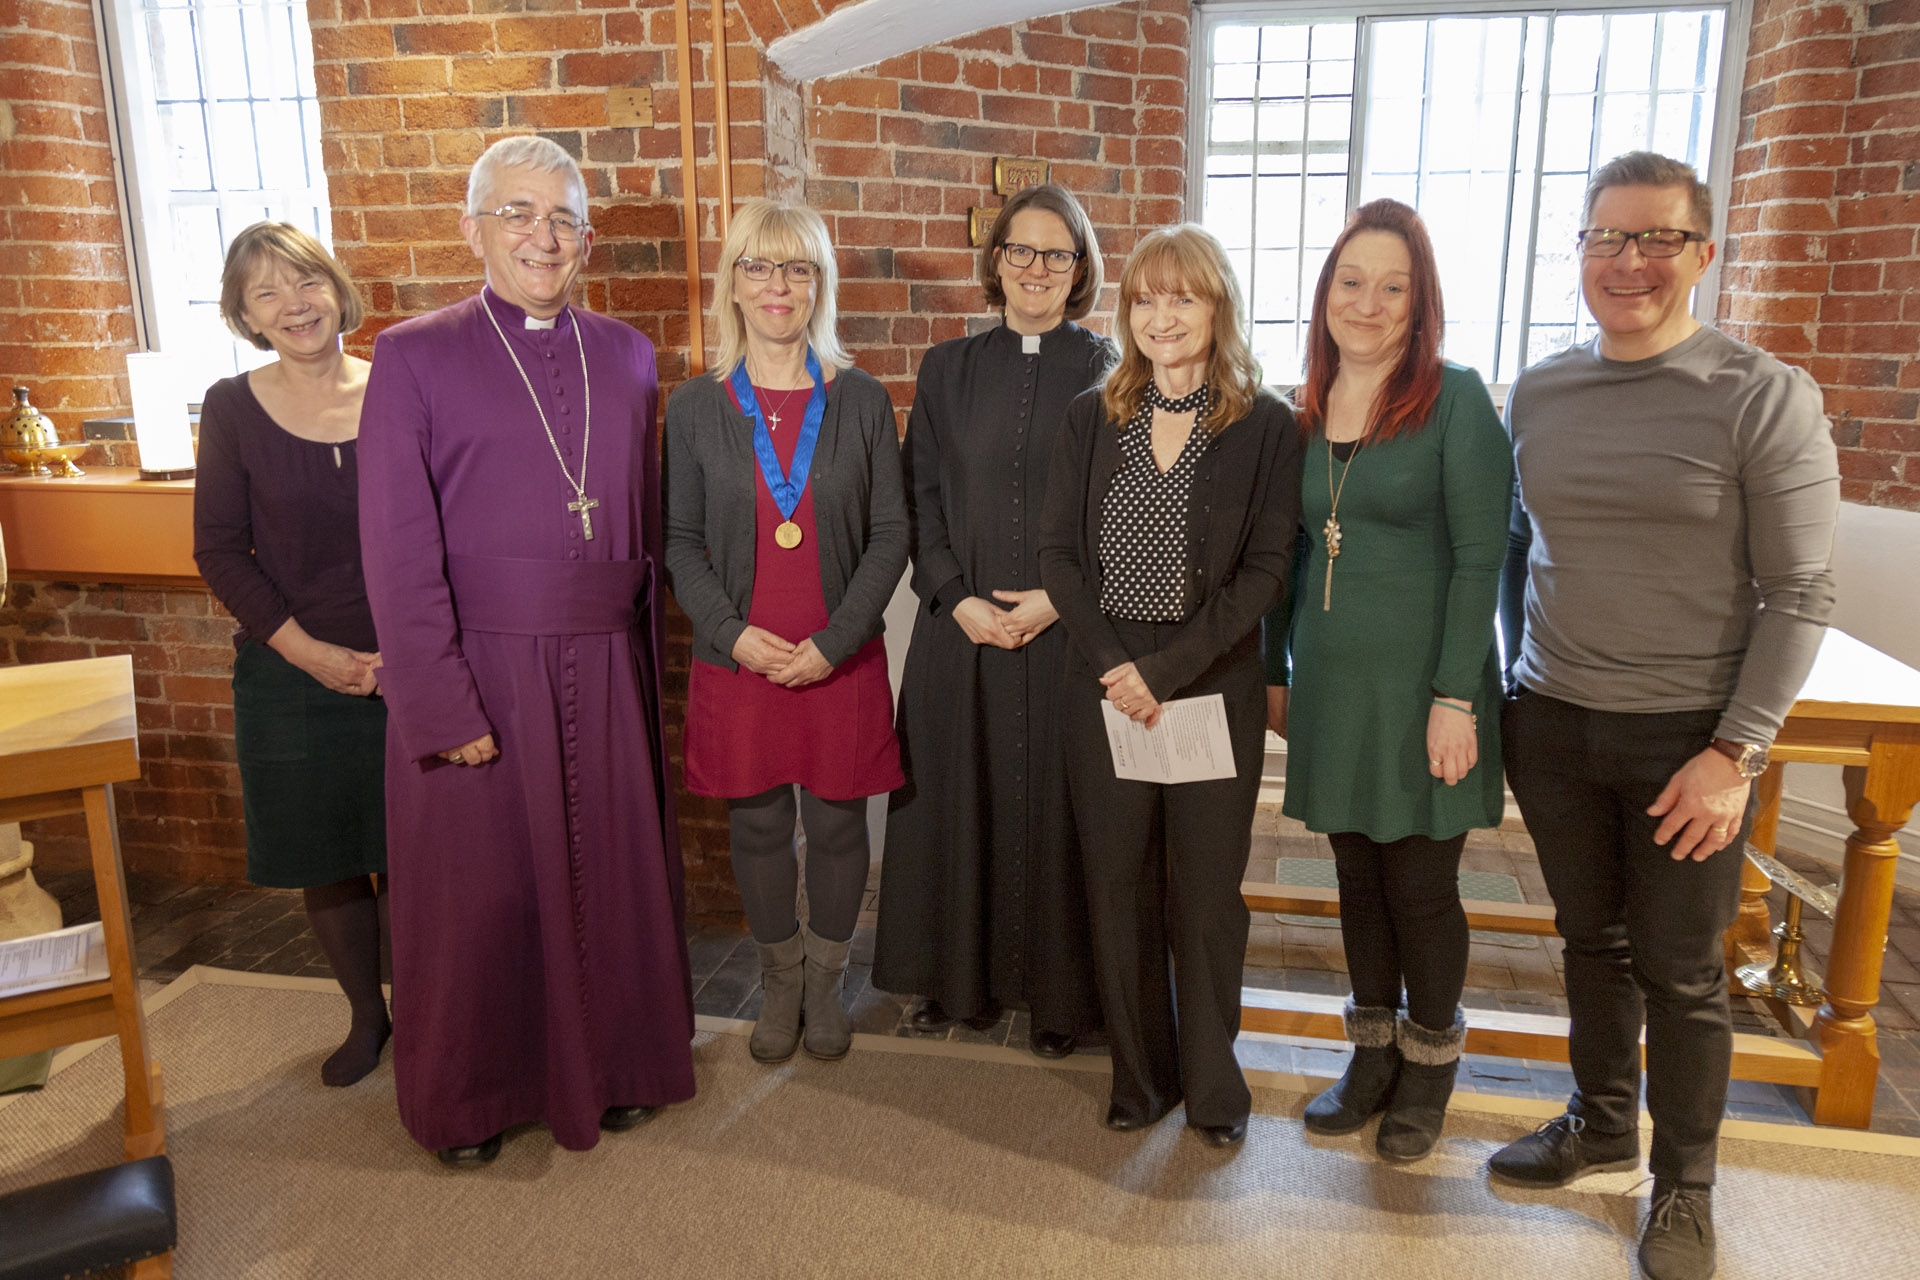 Julia & Bishop Michael Ipgrave, Eileen Reynolds, Revd Rebecca Lloyd and supporters in Bishop Michael's Chapel